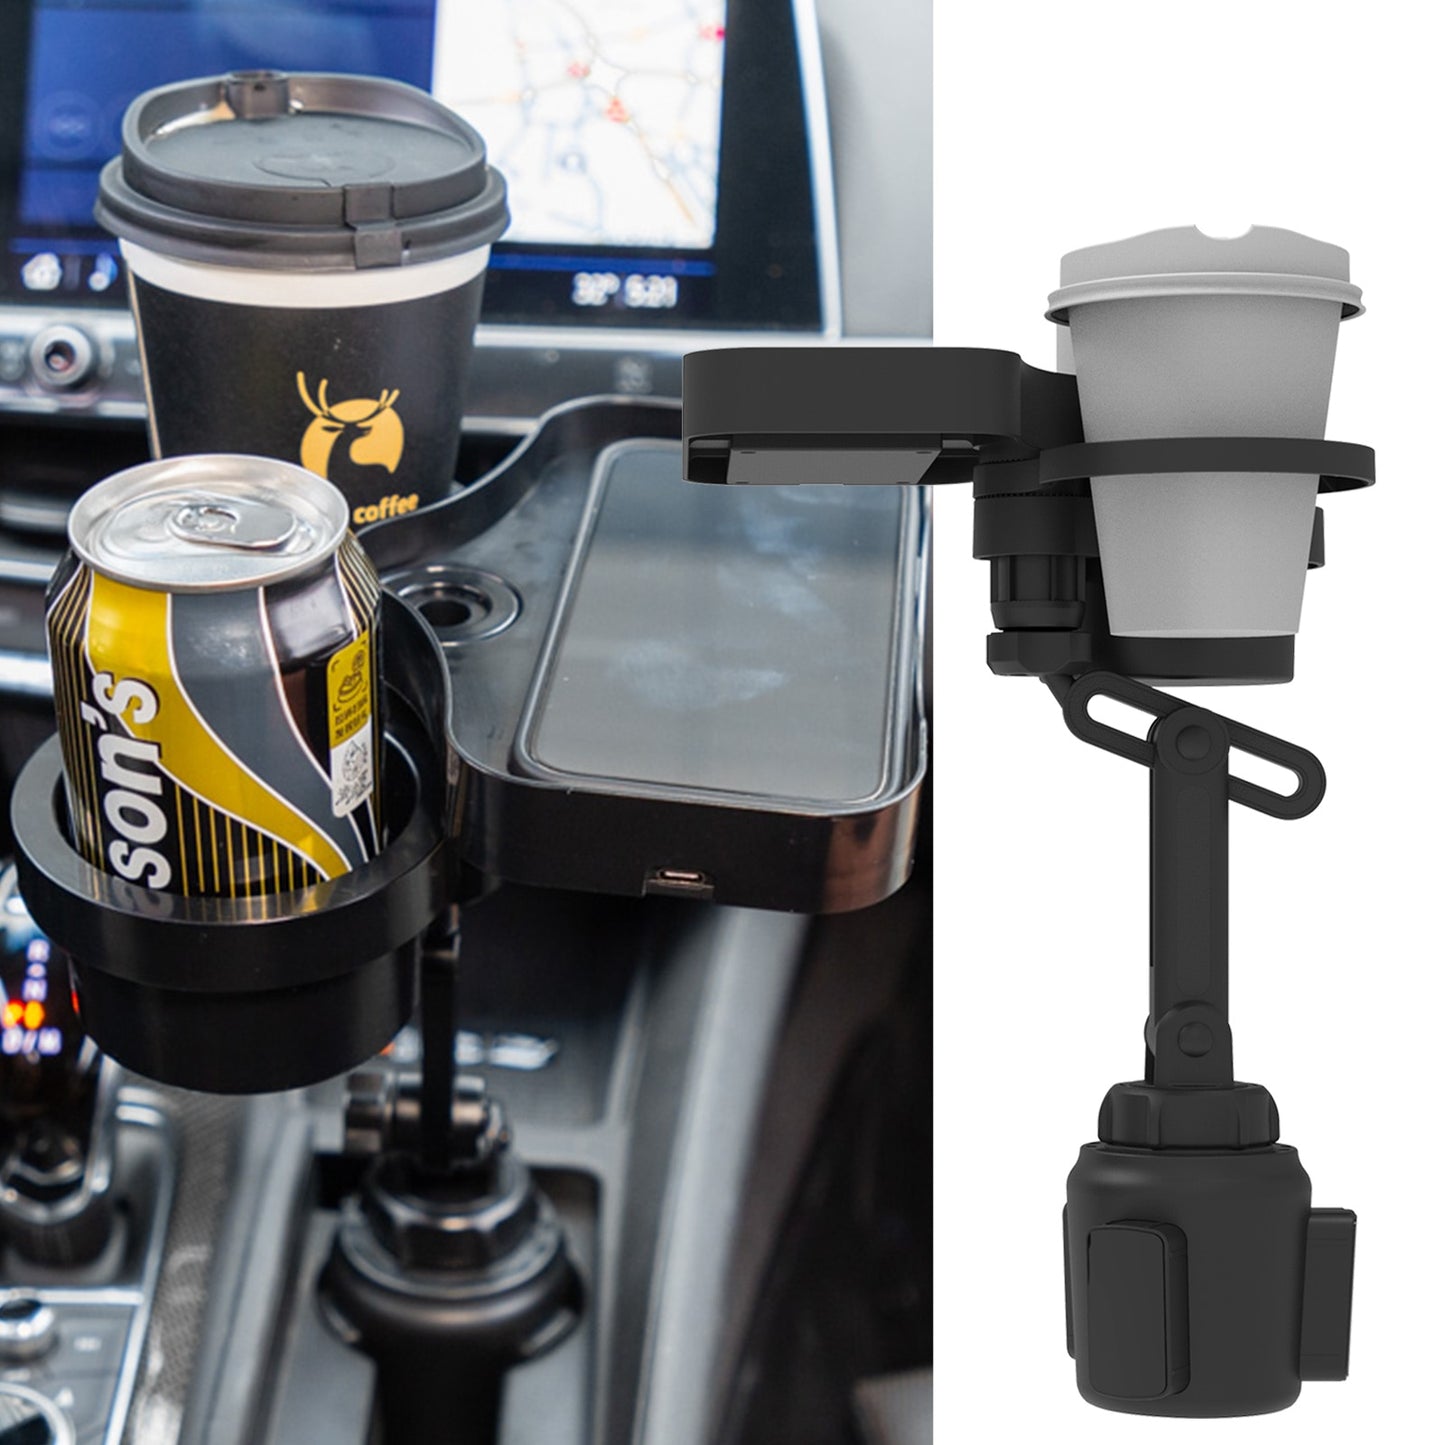 4 in 1 Mintiml Cup Holder Expander Adapter Car Cup Holder With Wireless Charging